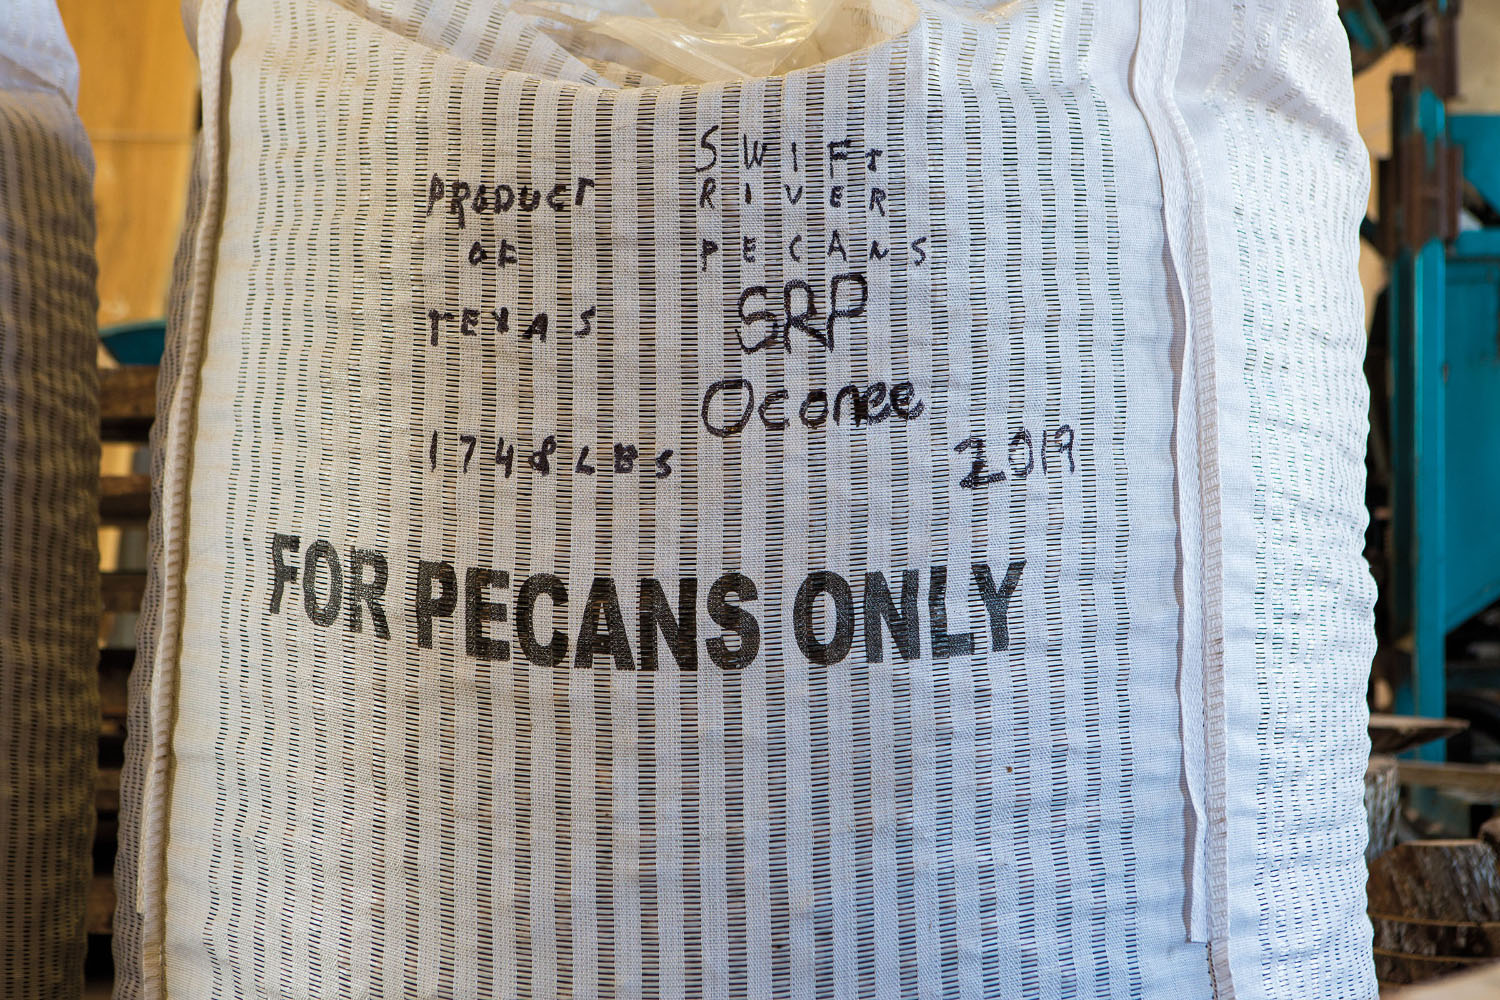 A white bag labeled "FOR PECANS ONLY"